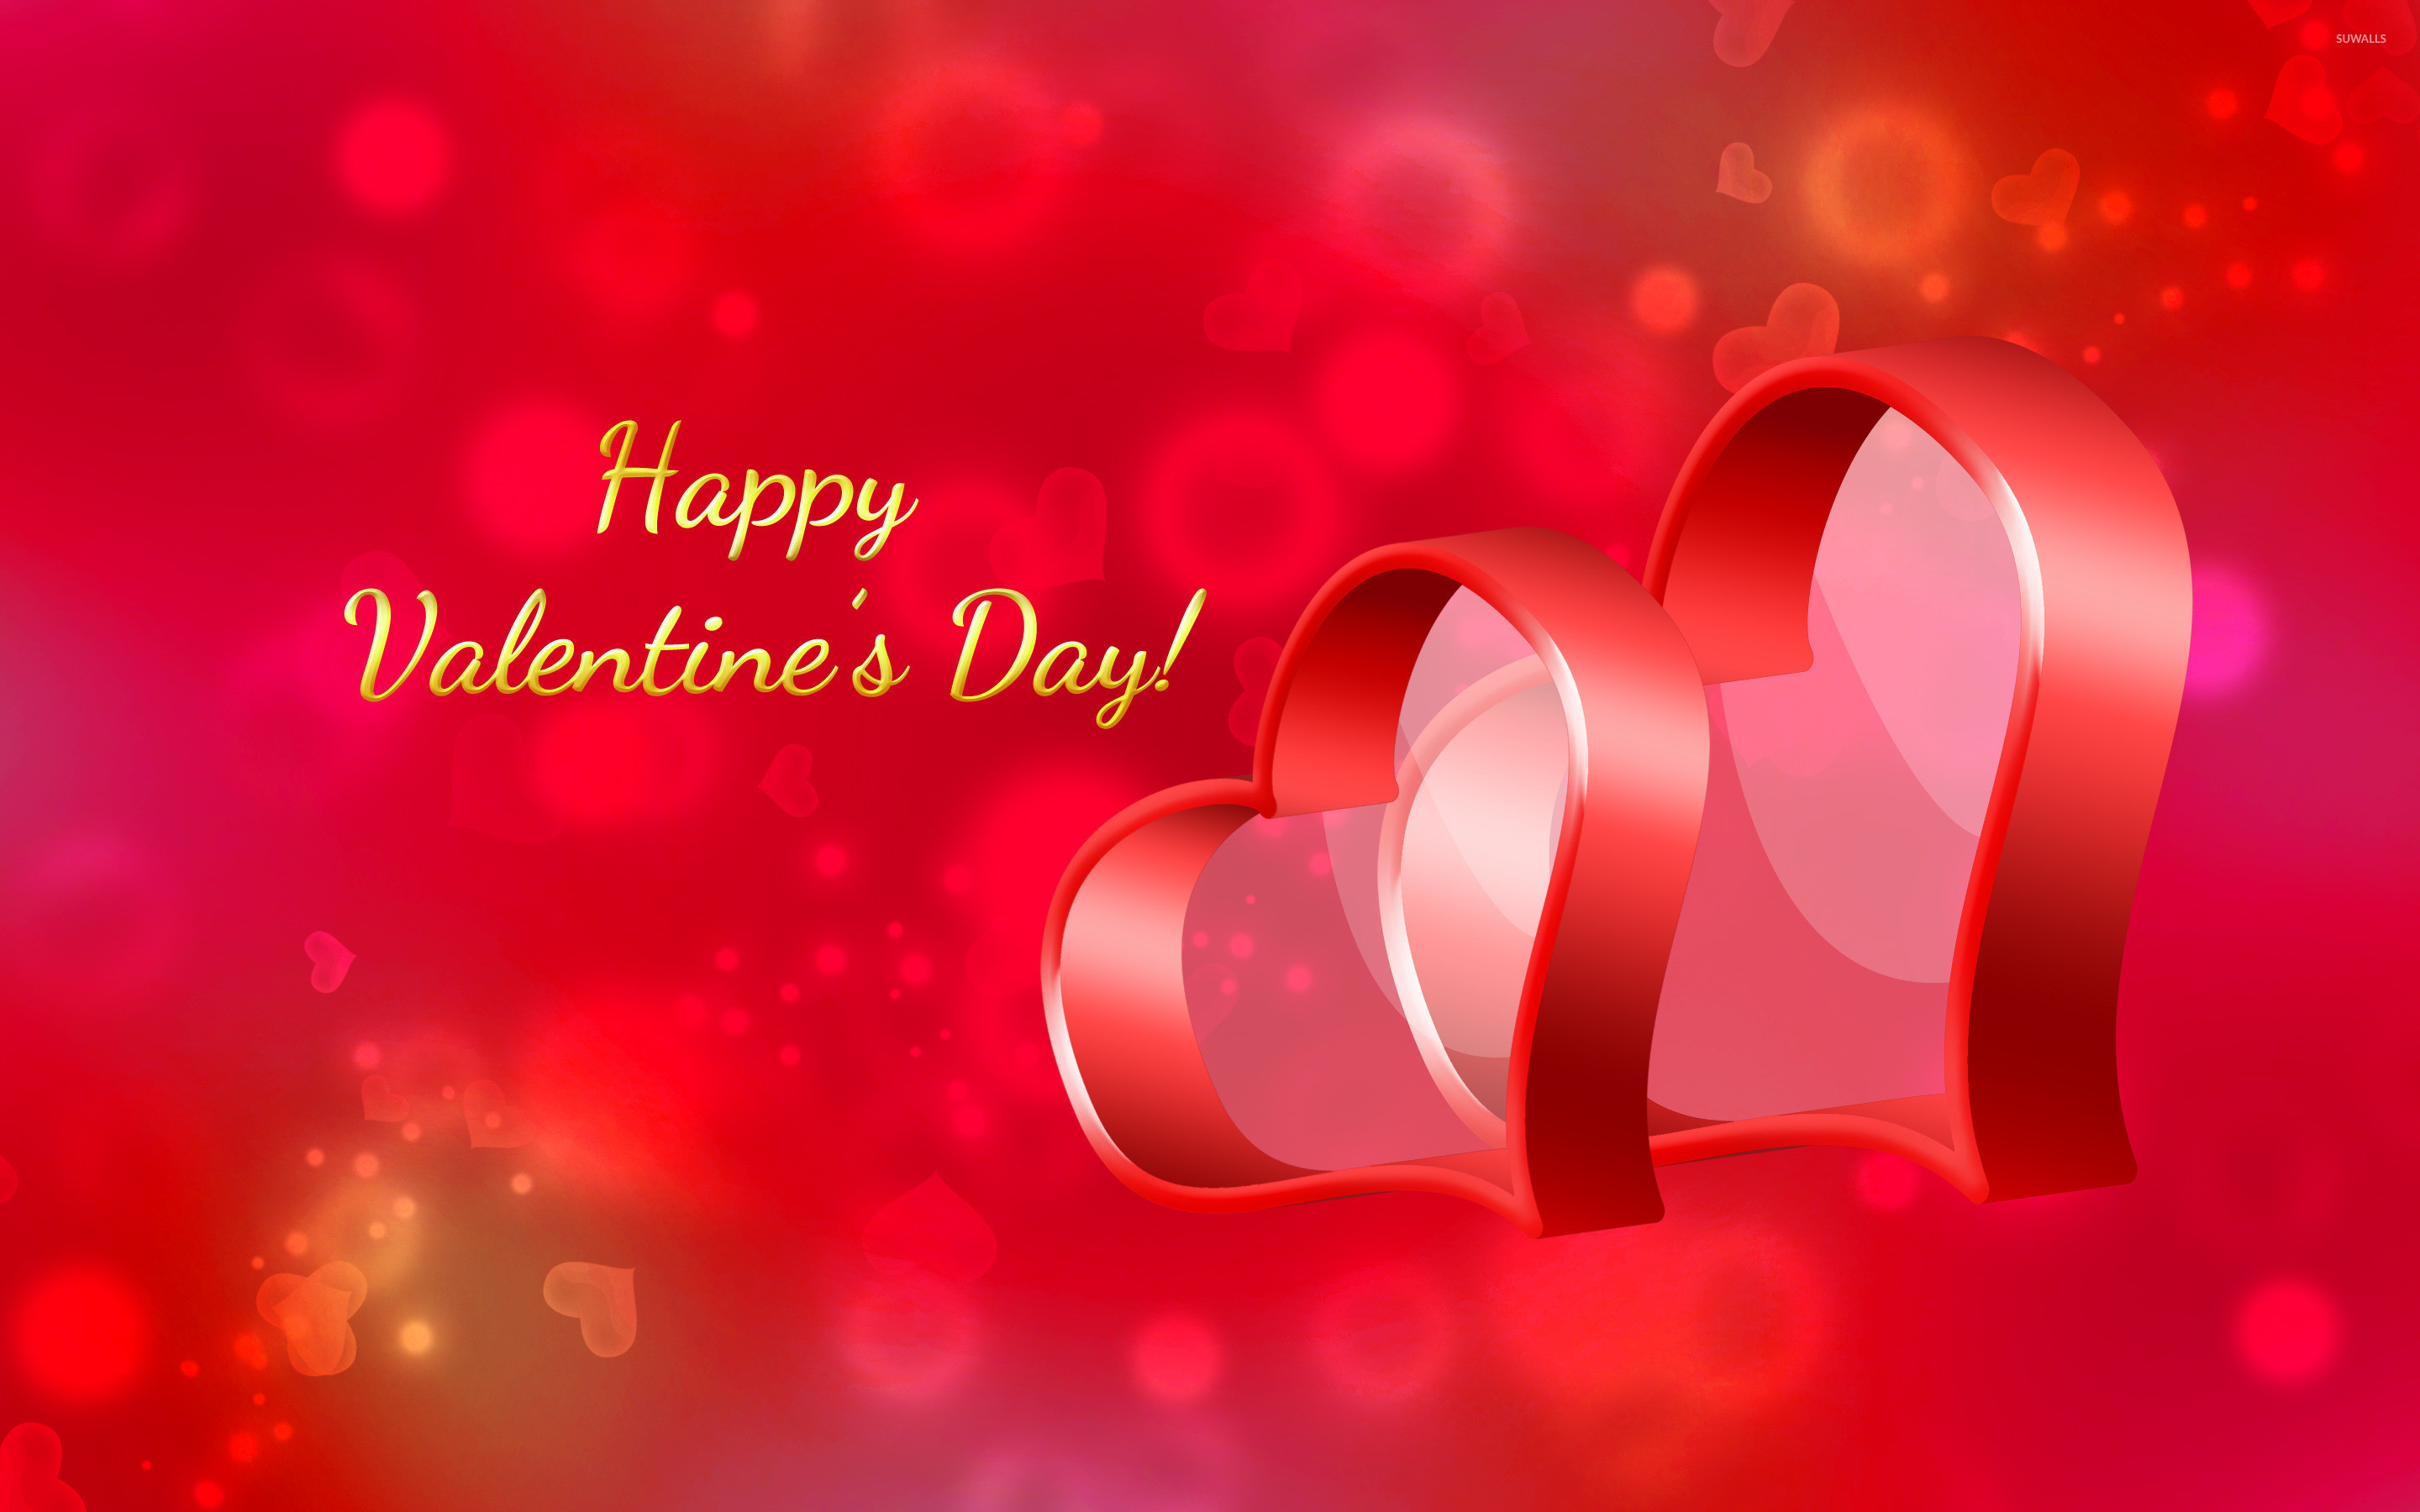 Valentines Day Wallpapers HD Android Apps on Google Play 28801800